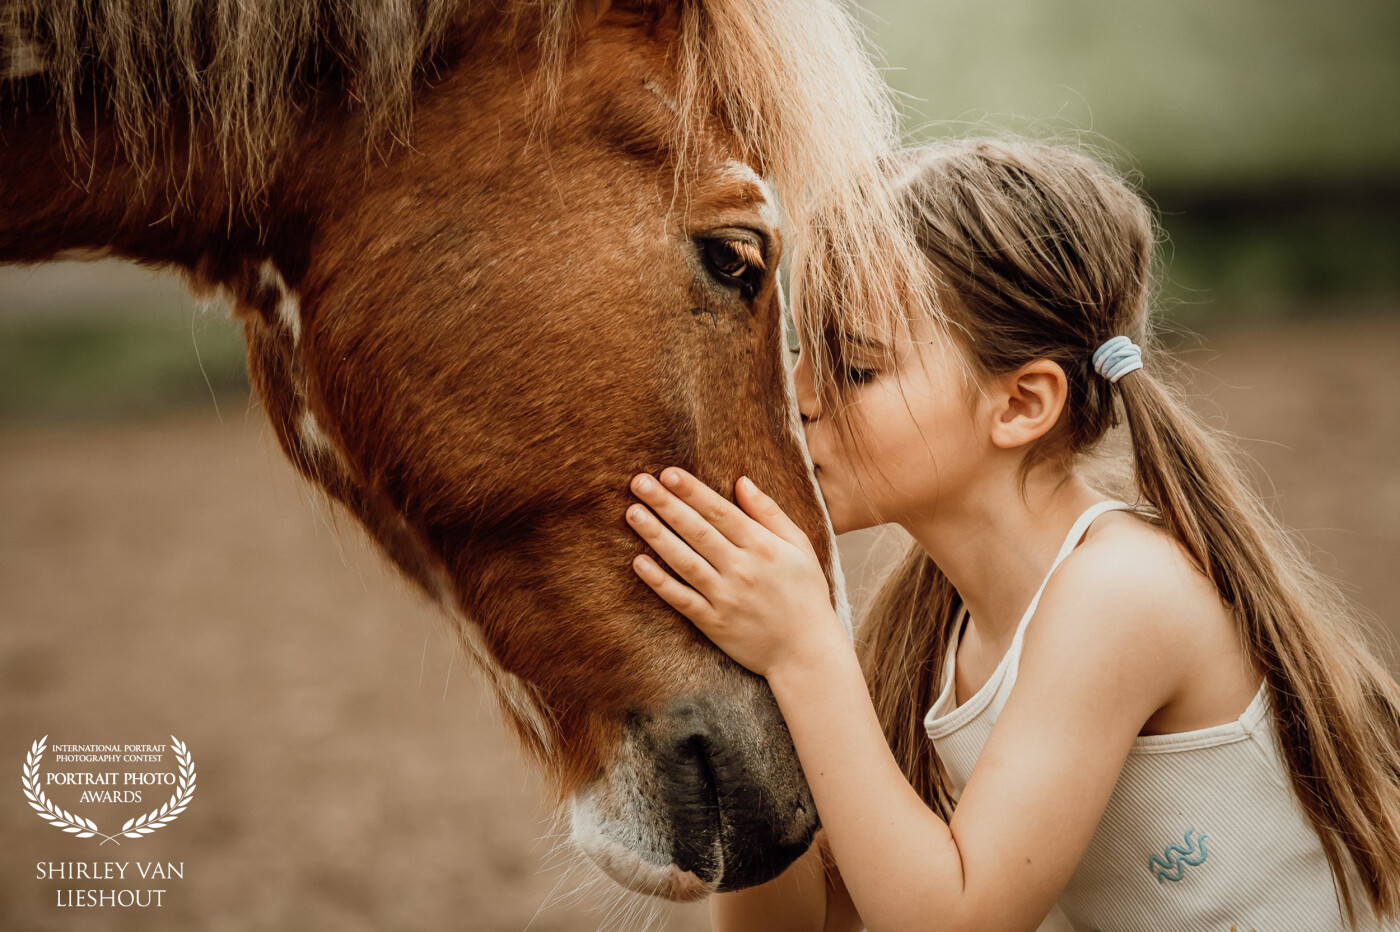 Having a photoshoot with your absolutely favorite pony of the riding school. That must be every horse girls' dream. This is Kit with her favorite pony Olaf. Such an intimate moment captured.